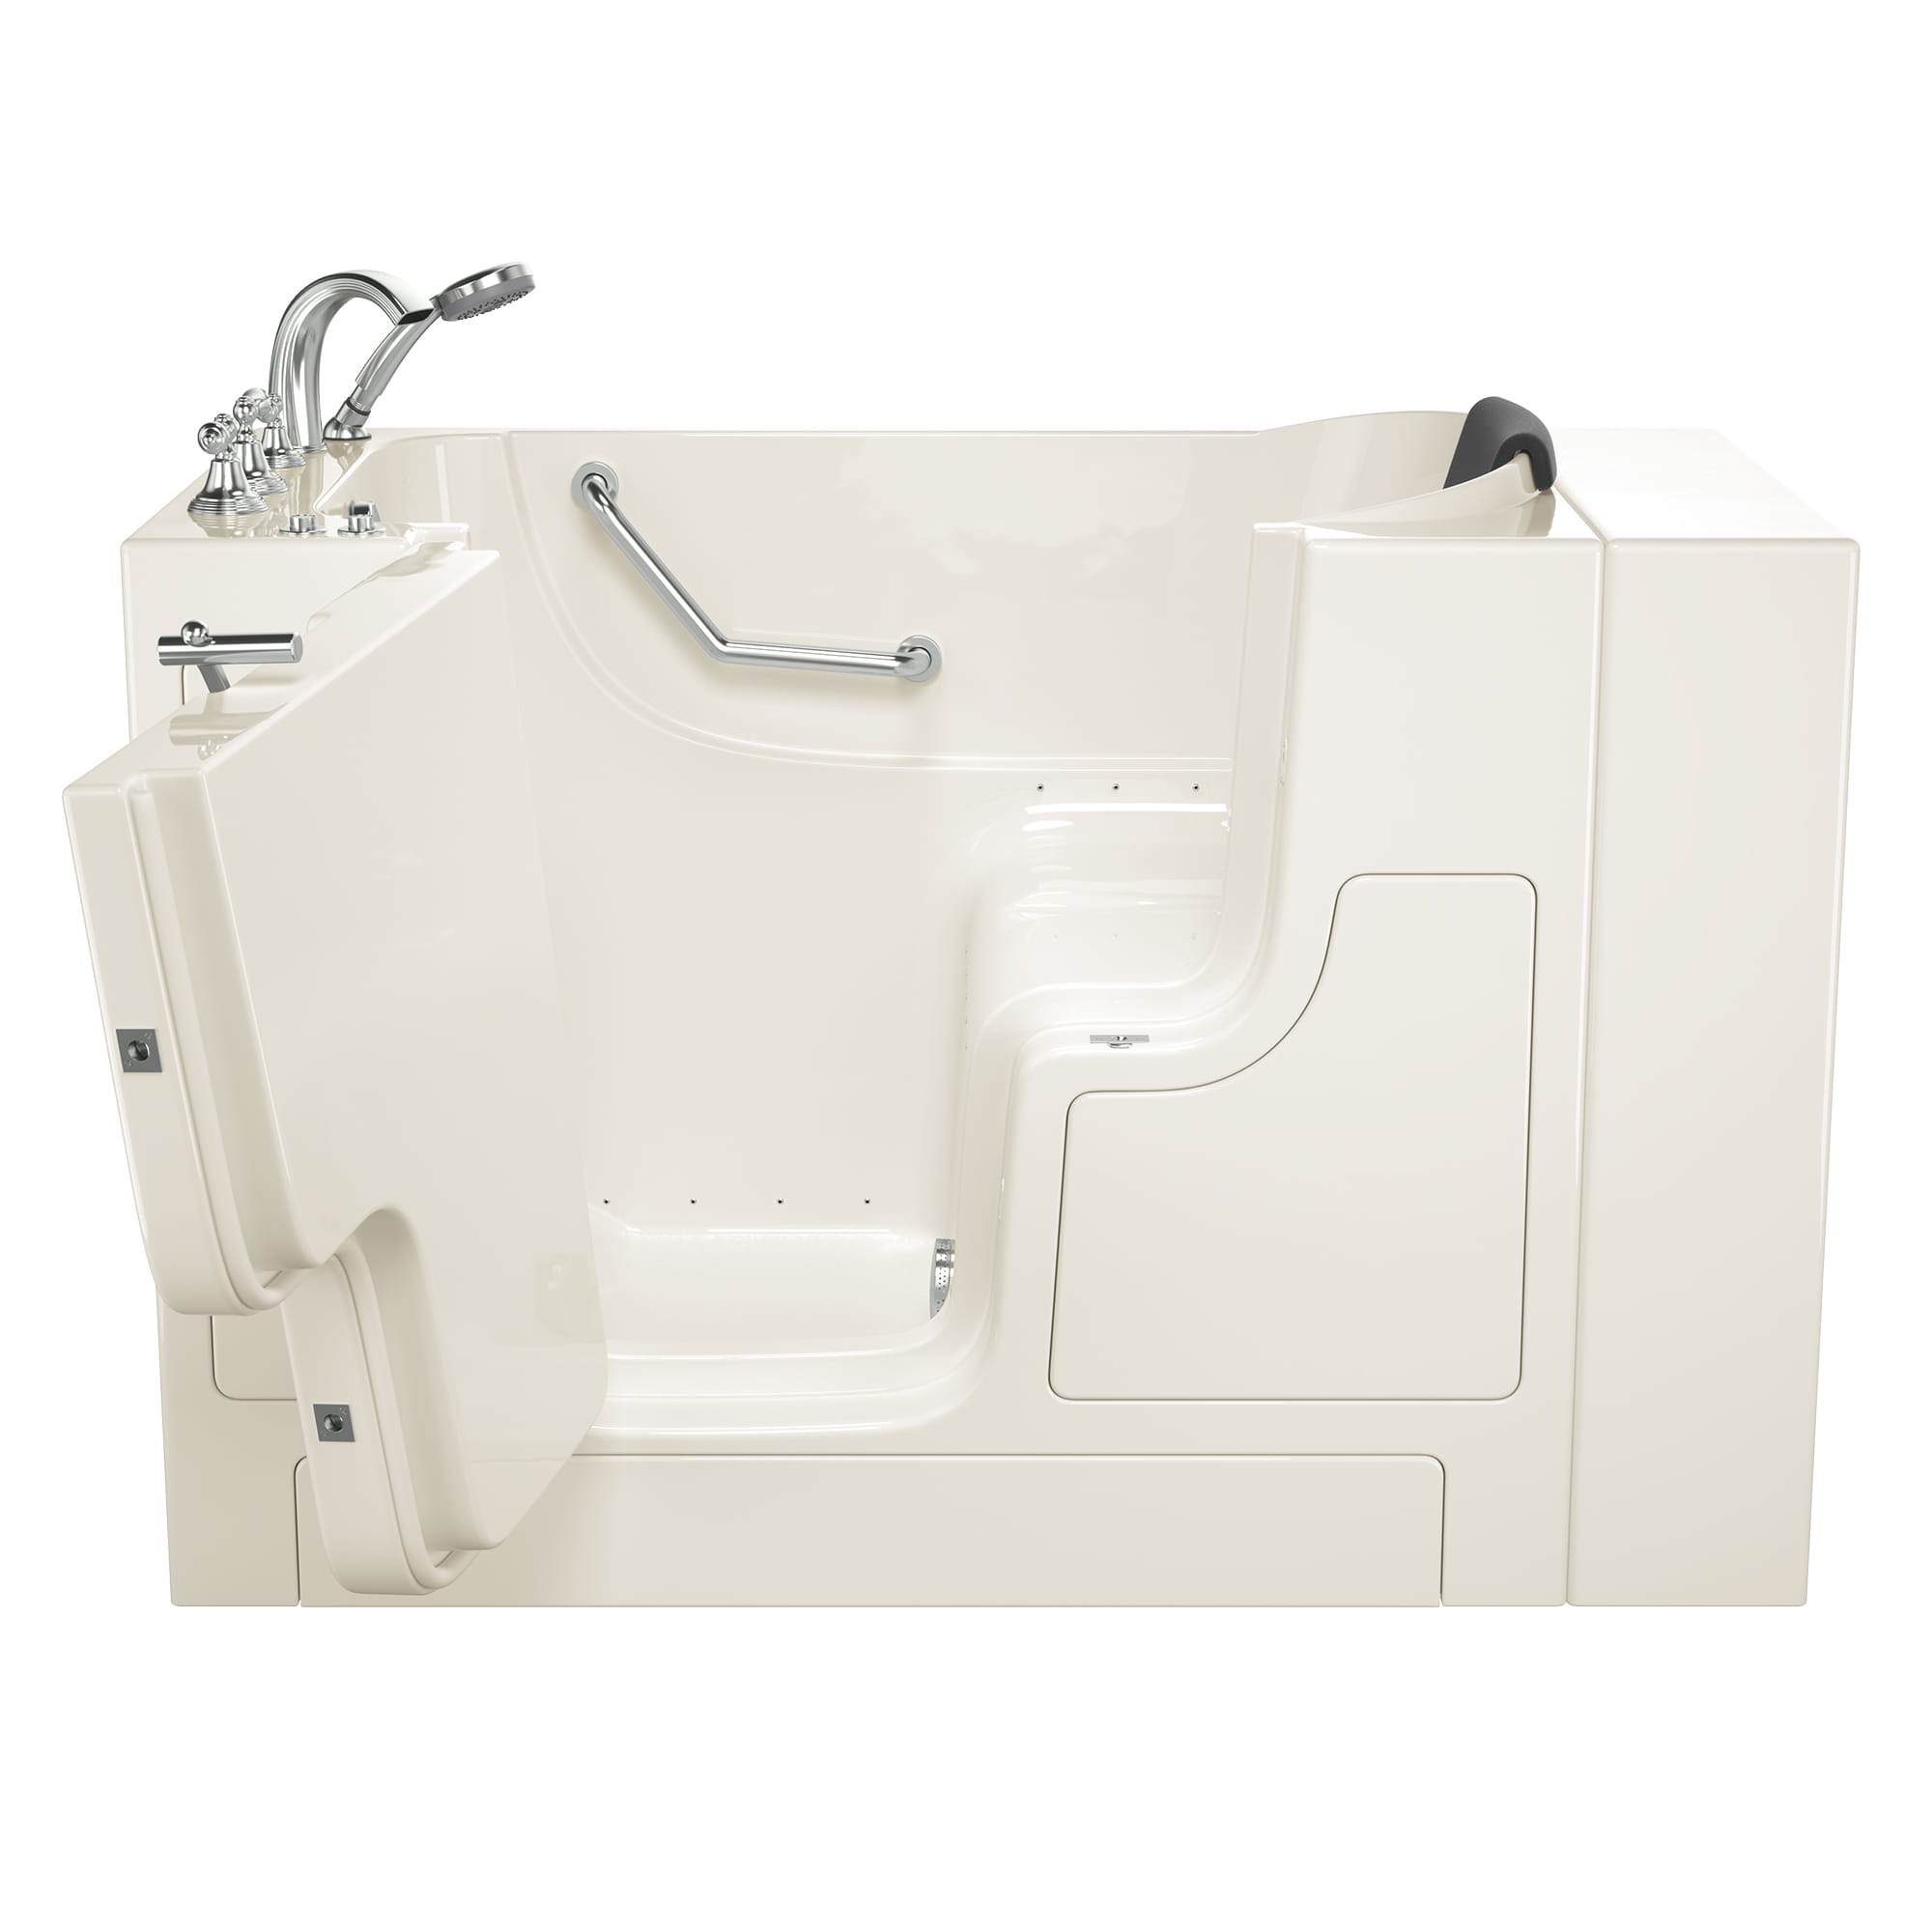 Gelcoat Premium Series 30 x 52  Inch Walk in Tub With Air Spa System   Left Hand Drain With Faucet WIB LINEN